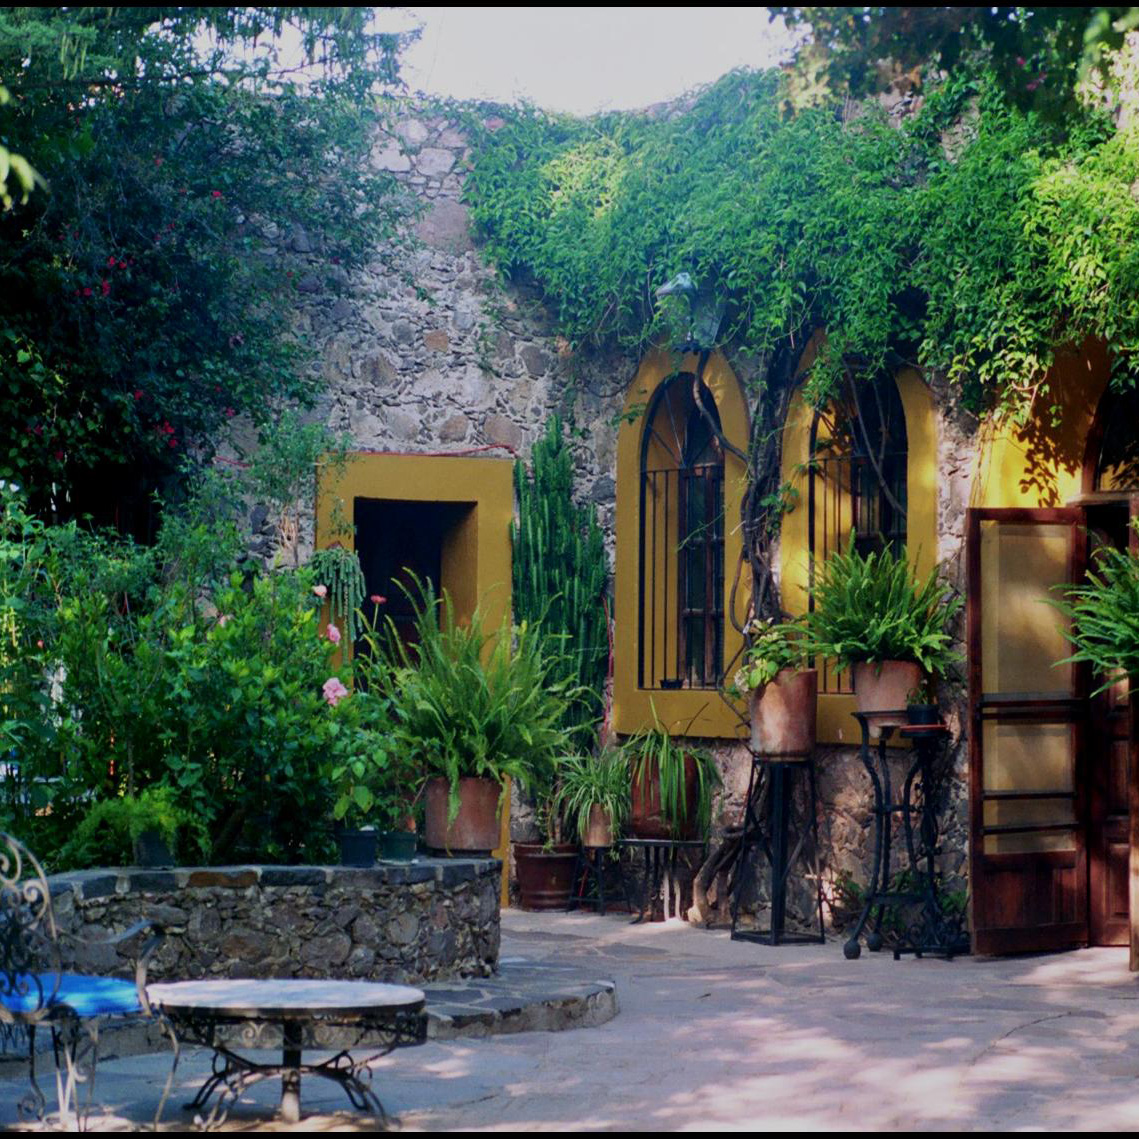 A leafy courtyard in Mexico